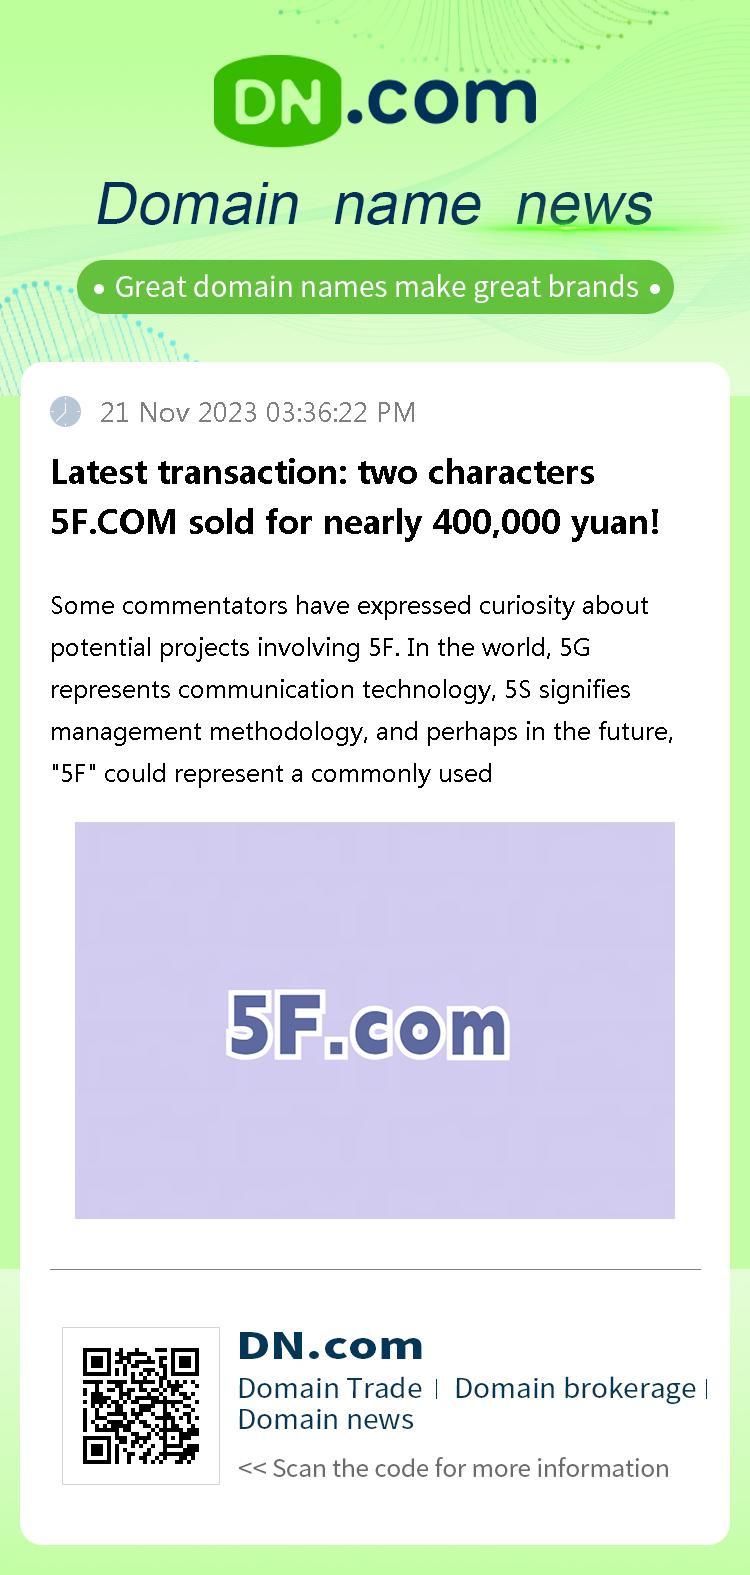 Latest transaction: two characters 5F.COM sold for nearly 400,000 yuan!